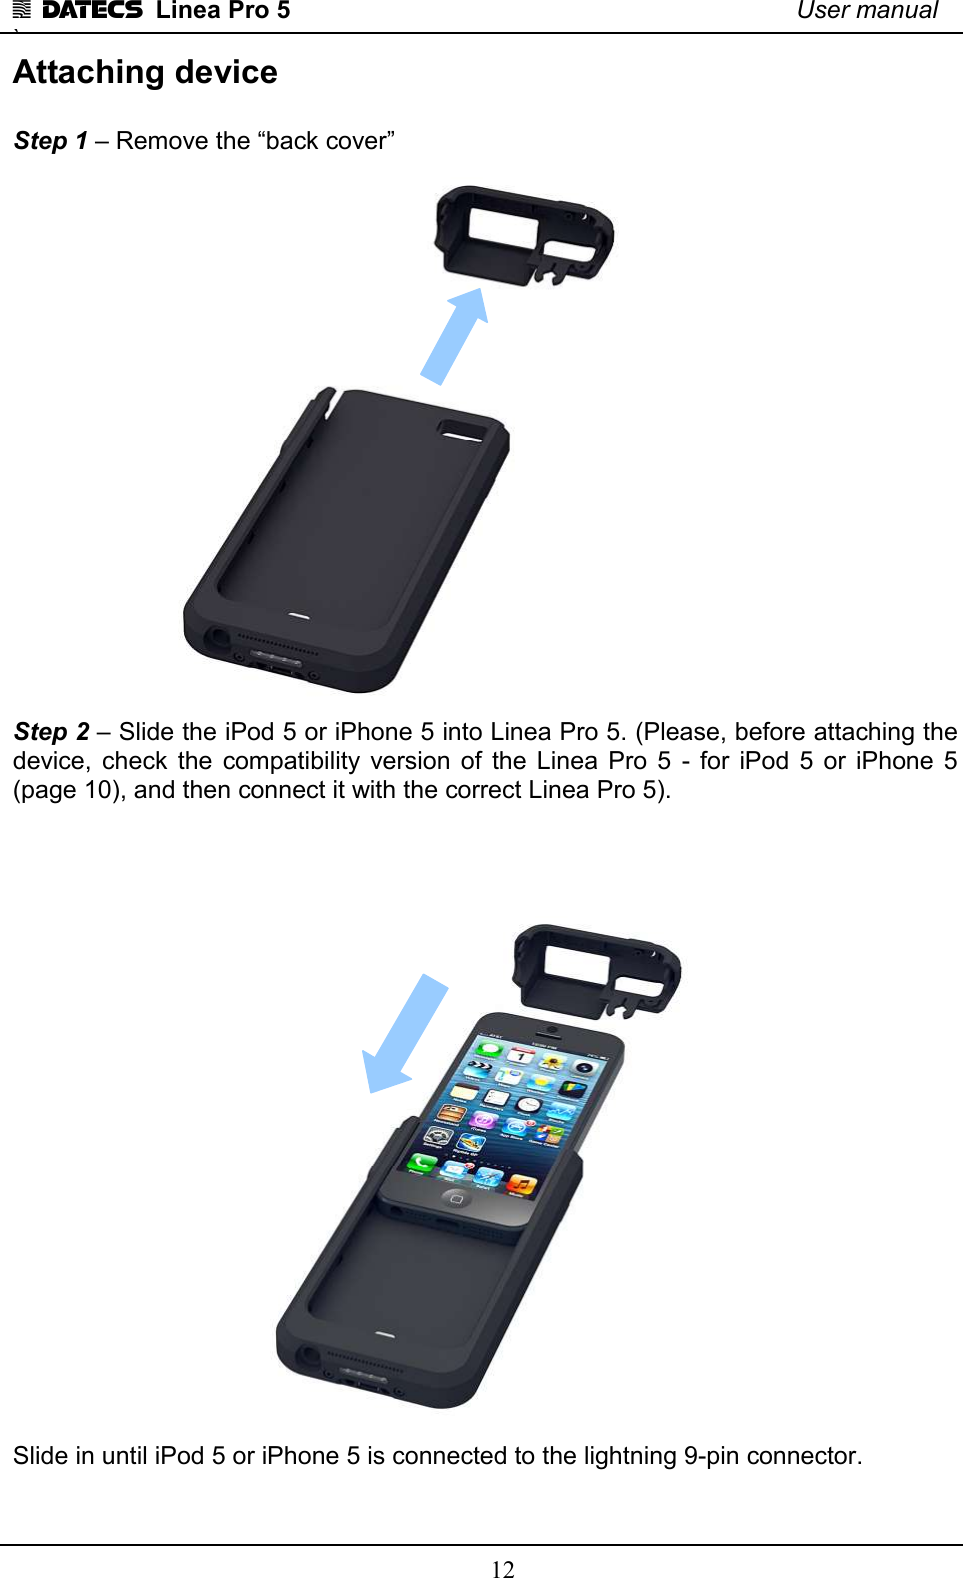 1 DATECS  Linea Pro 5    User manual `    12 Attaching device   Step 1 – Remove the “back cover”  Step 2 – Slide the iPod 5 or iPhone 5 into Linea Pro 5. (Please, before attaching the device,  check  the  compatibility  version  of  the  Linea  Pro  5  -  for  iPod  5  or  iPhone  5 (page 10), and then connect it with the correct Linea Pro 5).   Slide in until iPod 5 or iPhone 5 is connected to the lightning 9-pin connector.  